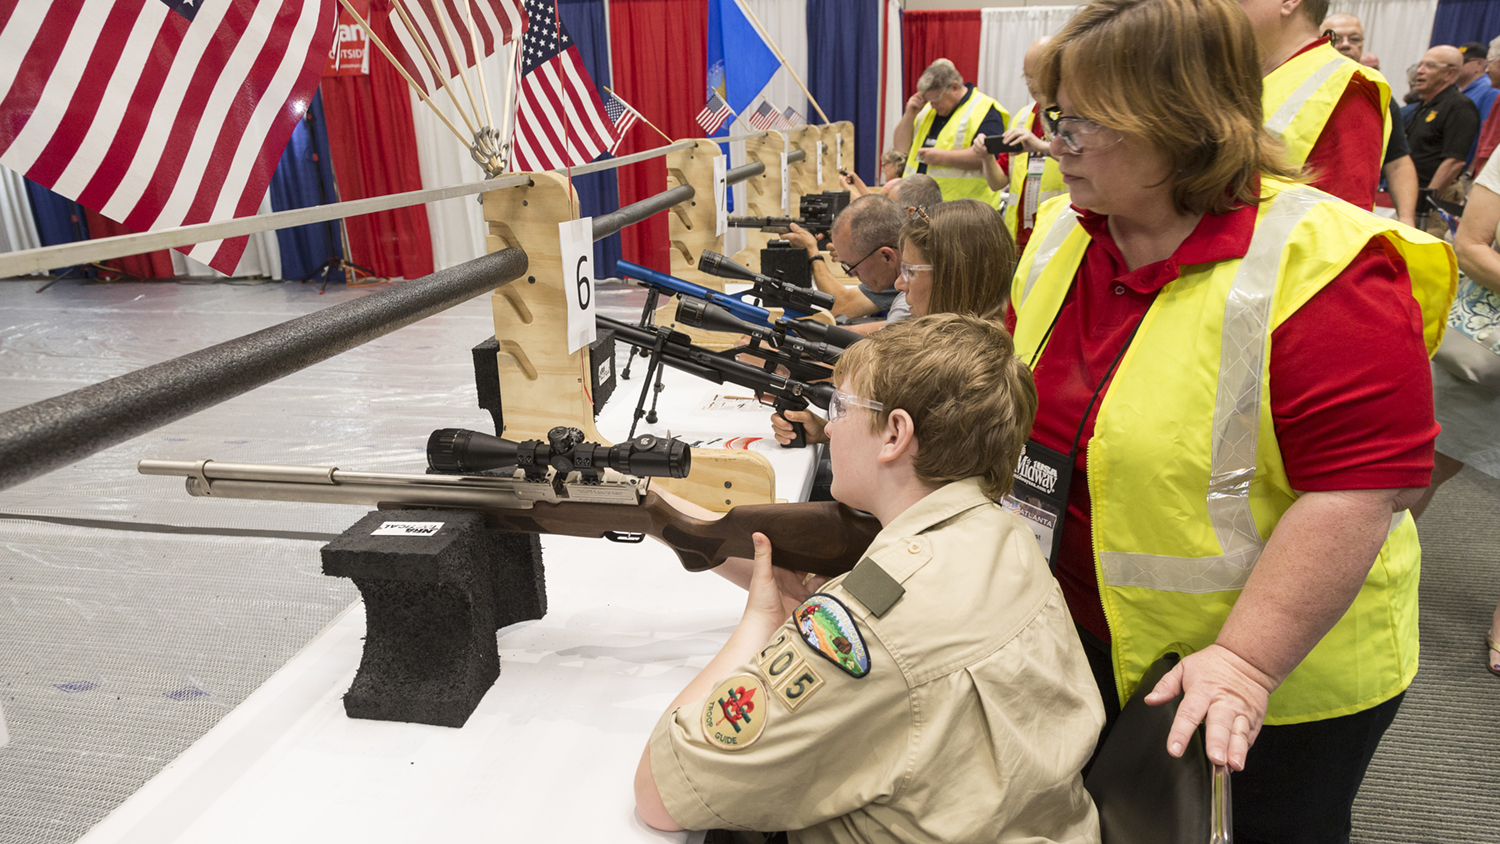 NRA Blog Hit the Range at NRA Annual Meetings